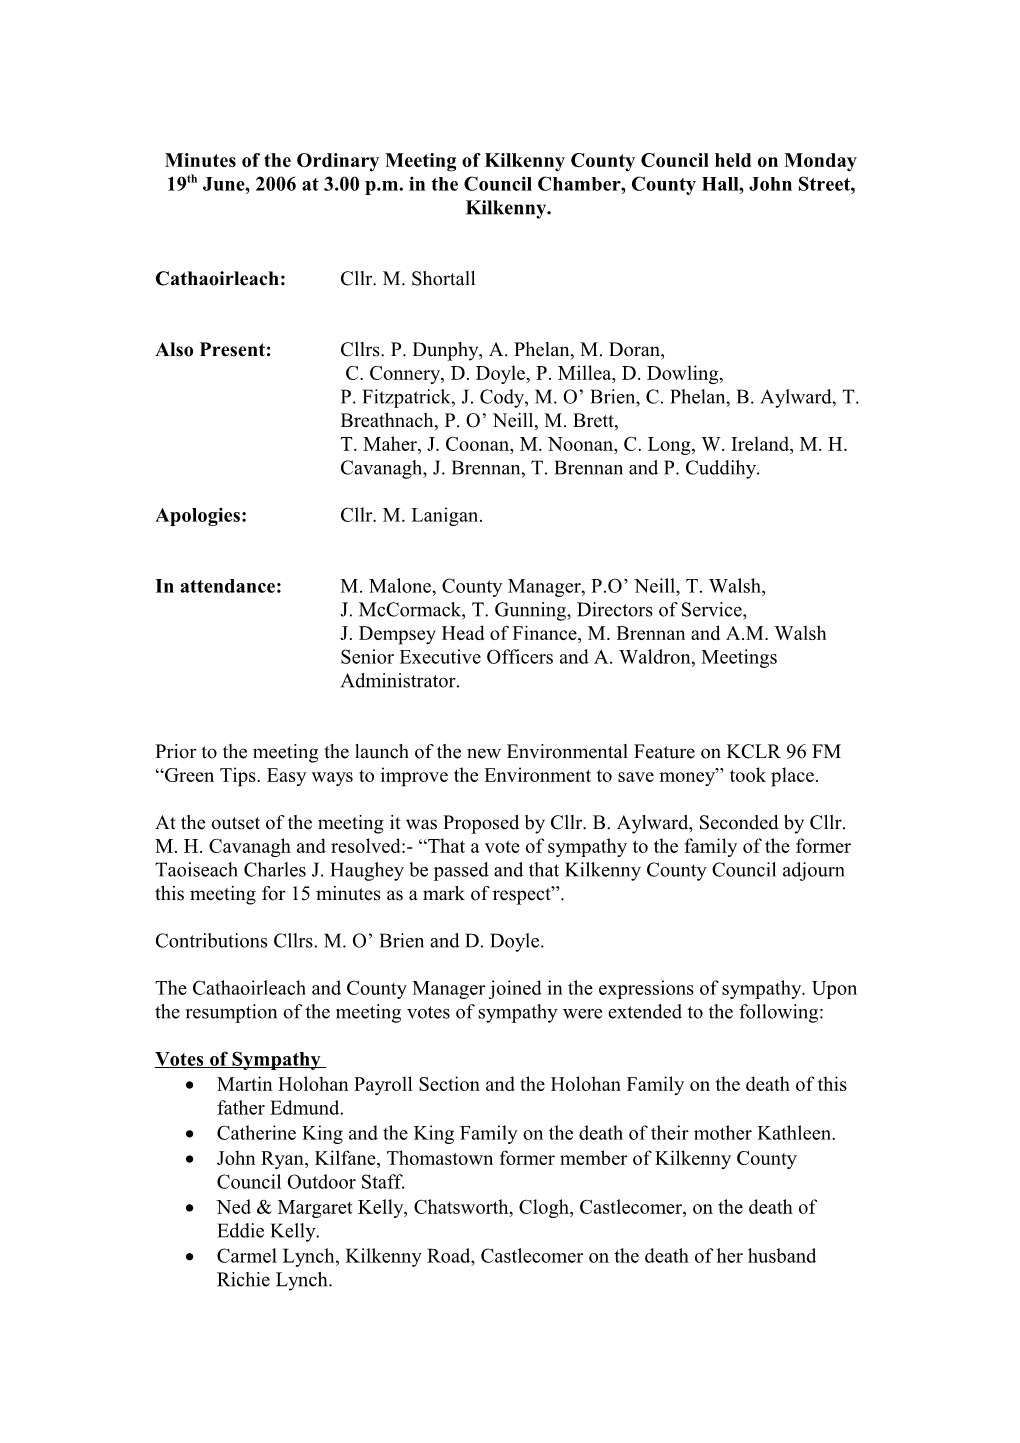 Minutes of the Ordinary Meeting of Kilkenny County Council Held on Monday 19Th June, 2006 at 3